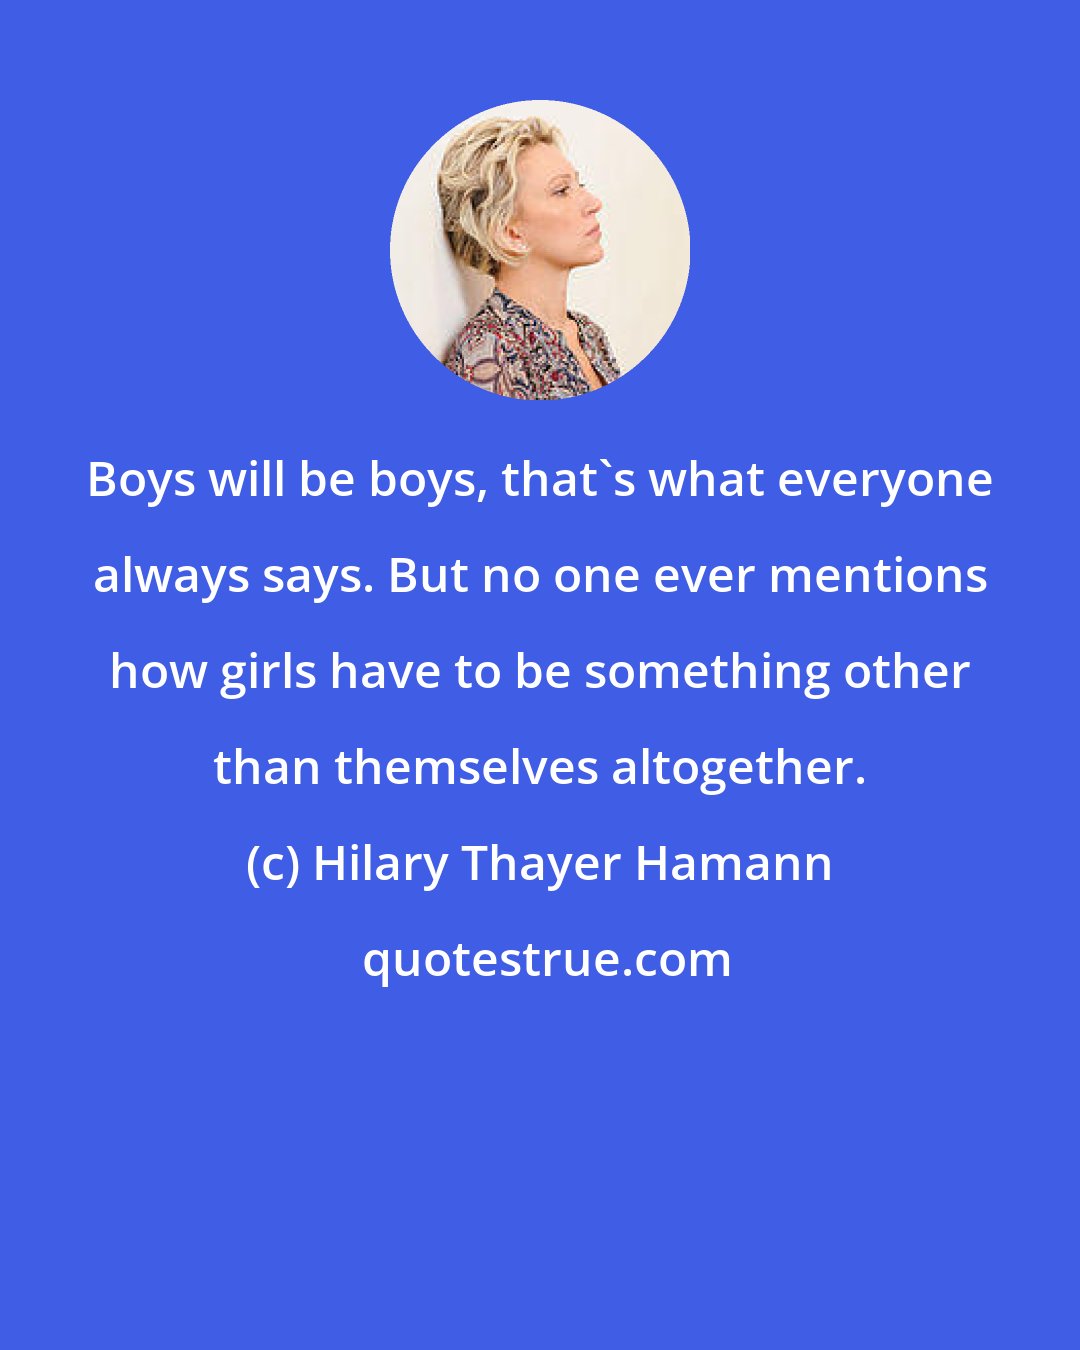 Hilary Thayer Hamann: Boys will be boys, that's what everyone always says. But no one ever mentions how girls have to be something other than themselves altogether.